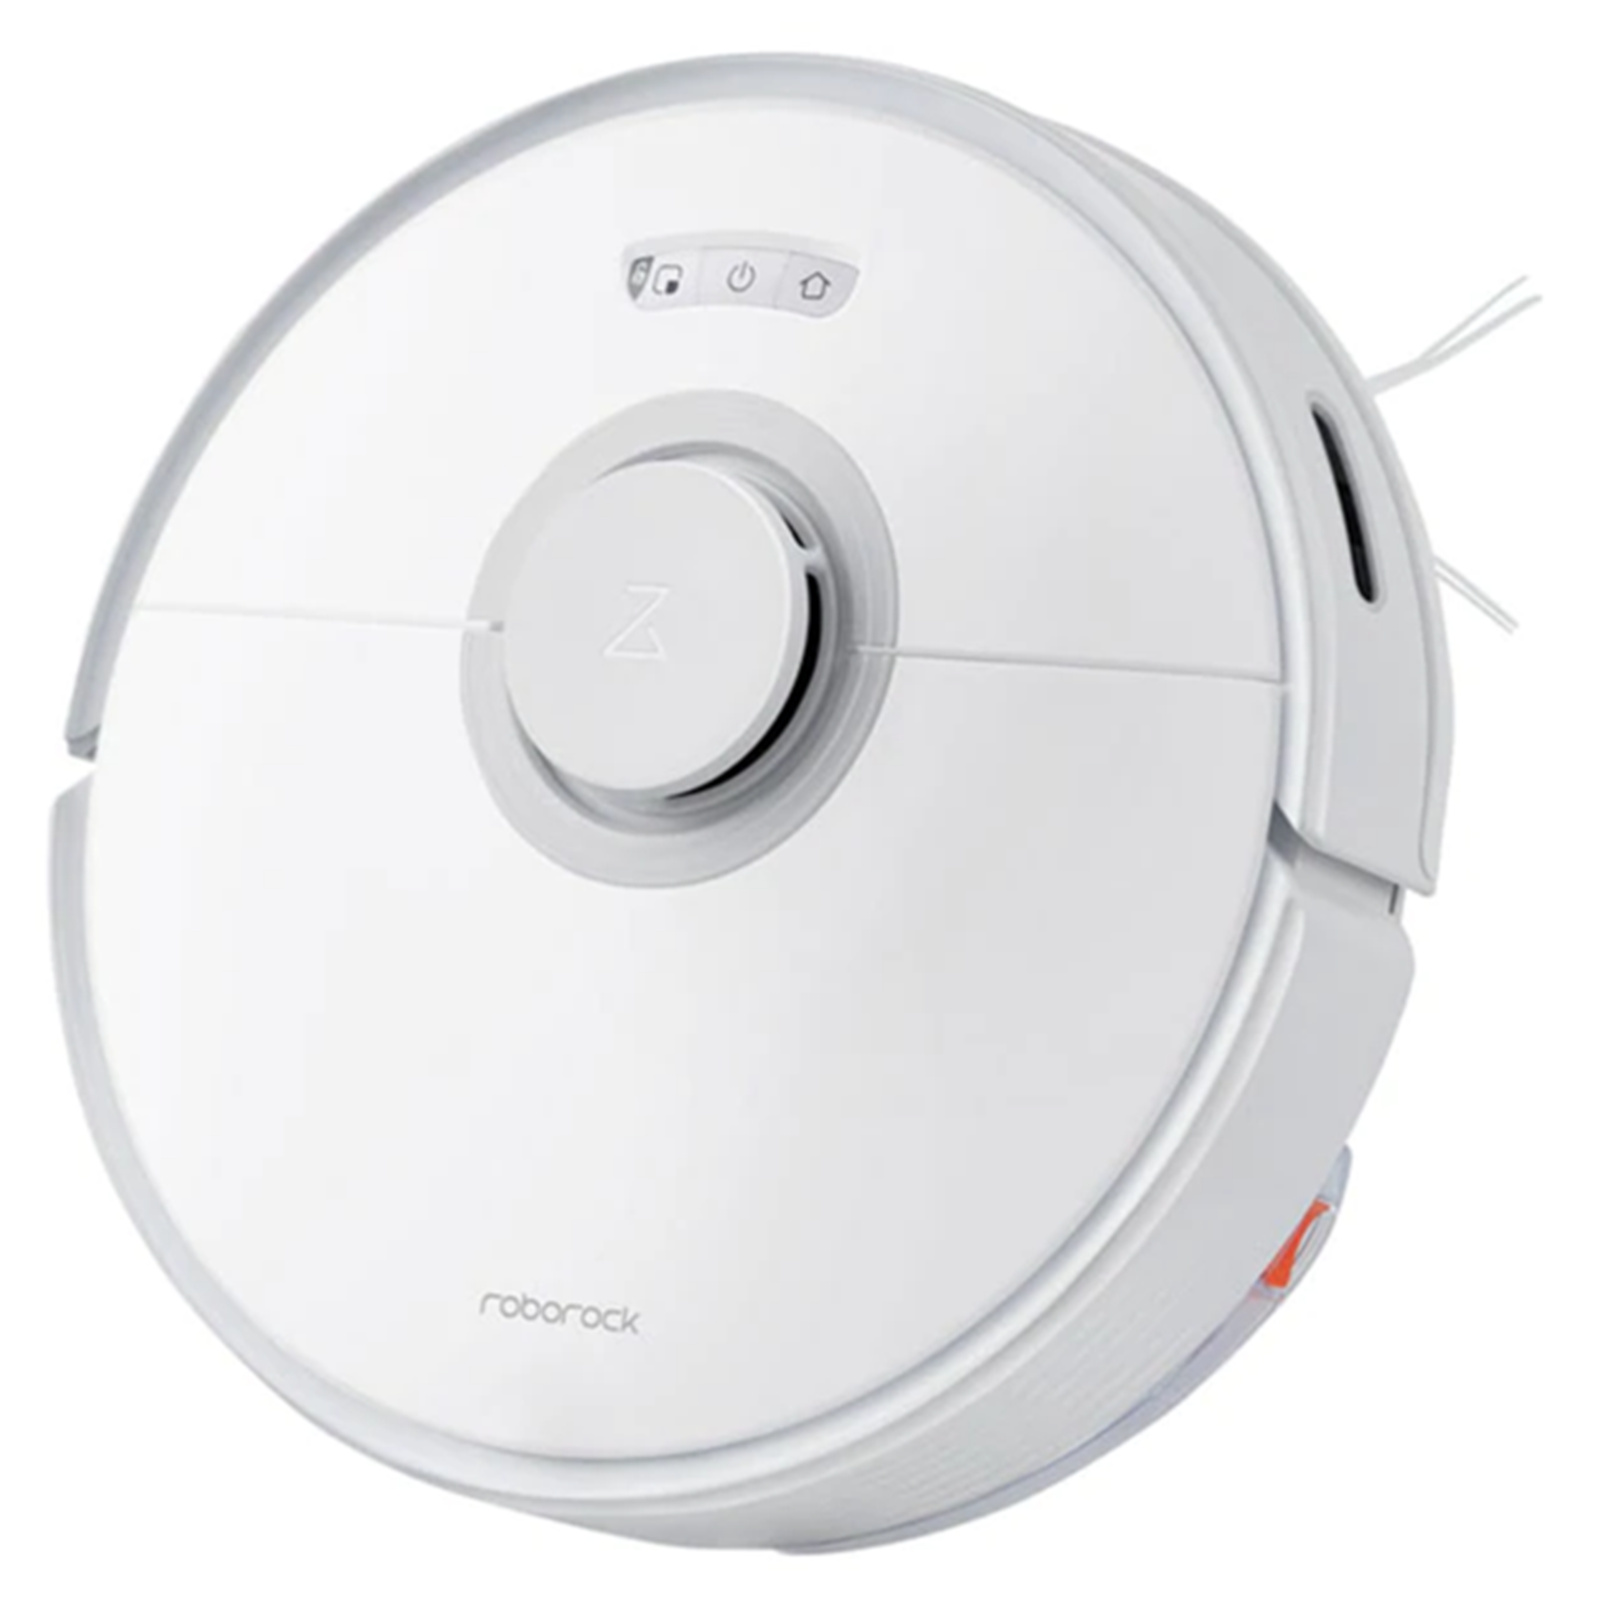 Buy the Roborock Q7 Max Smart Robot Vacuum Cleaner White - 2-in-1 Sweeping  and... ( HOMRBK0019 ) online - PBTech.com/pacific